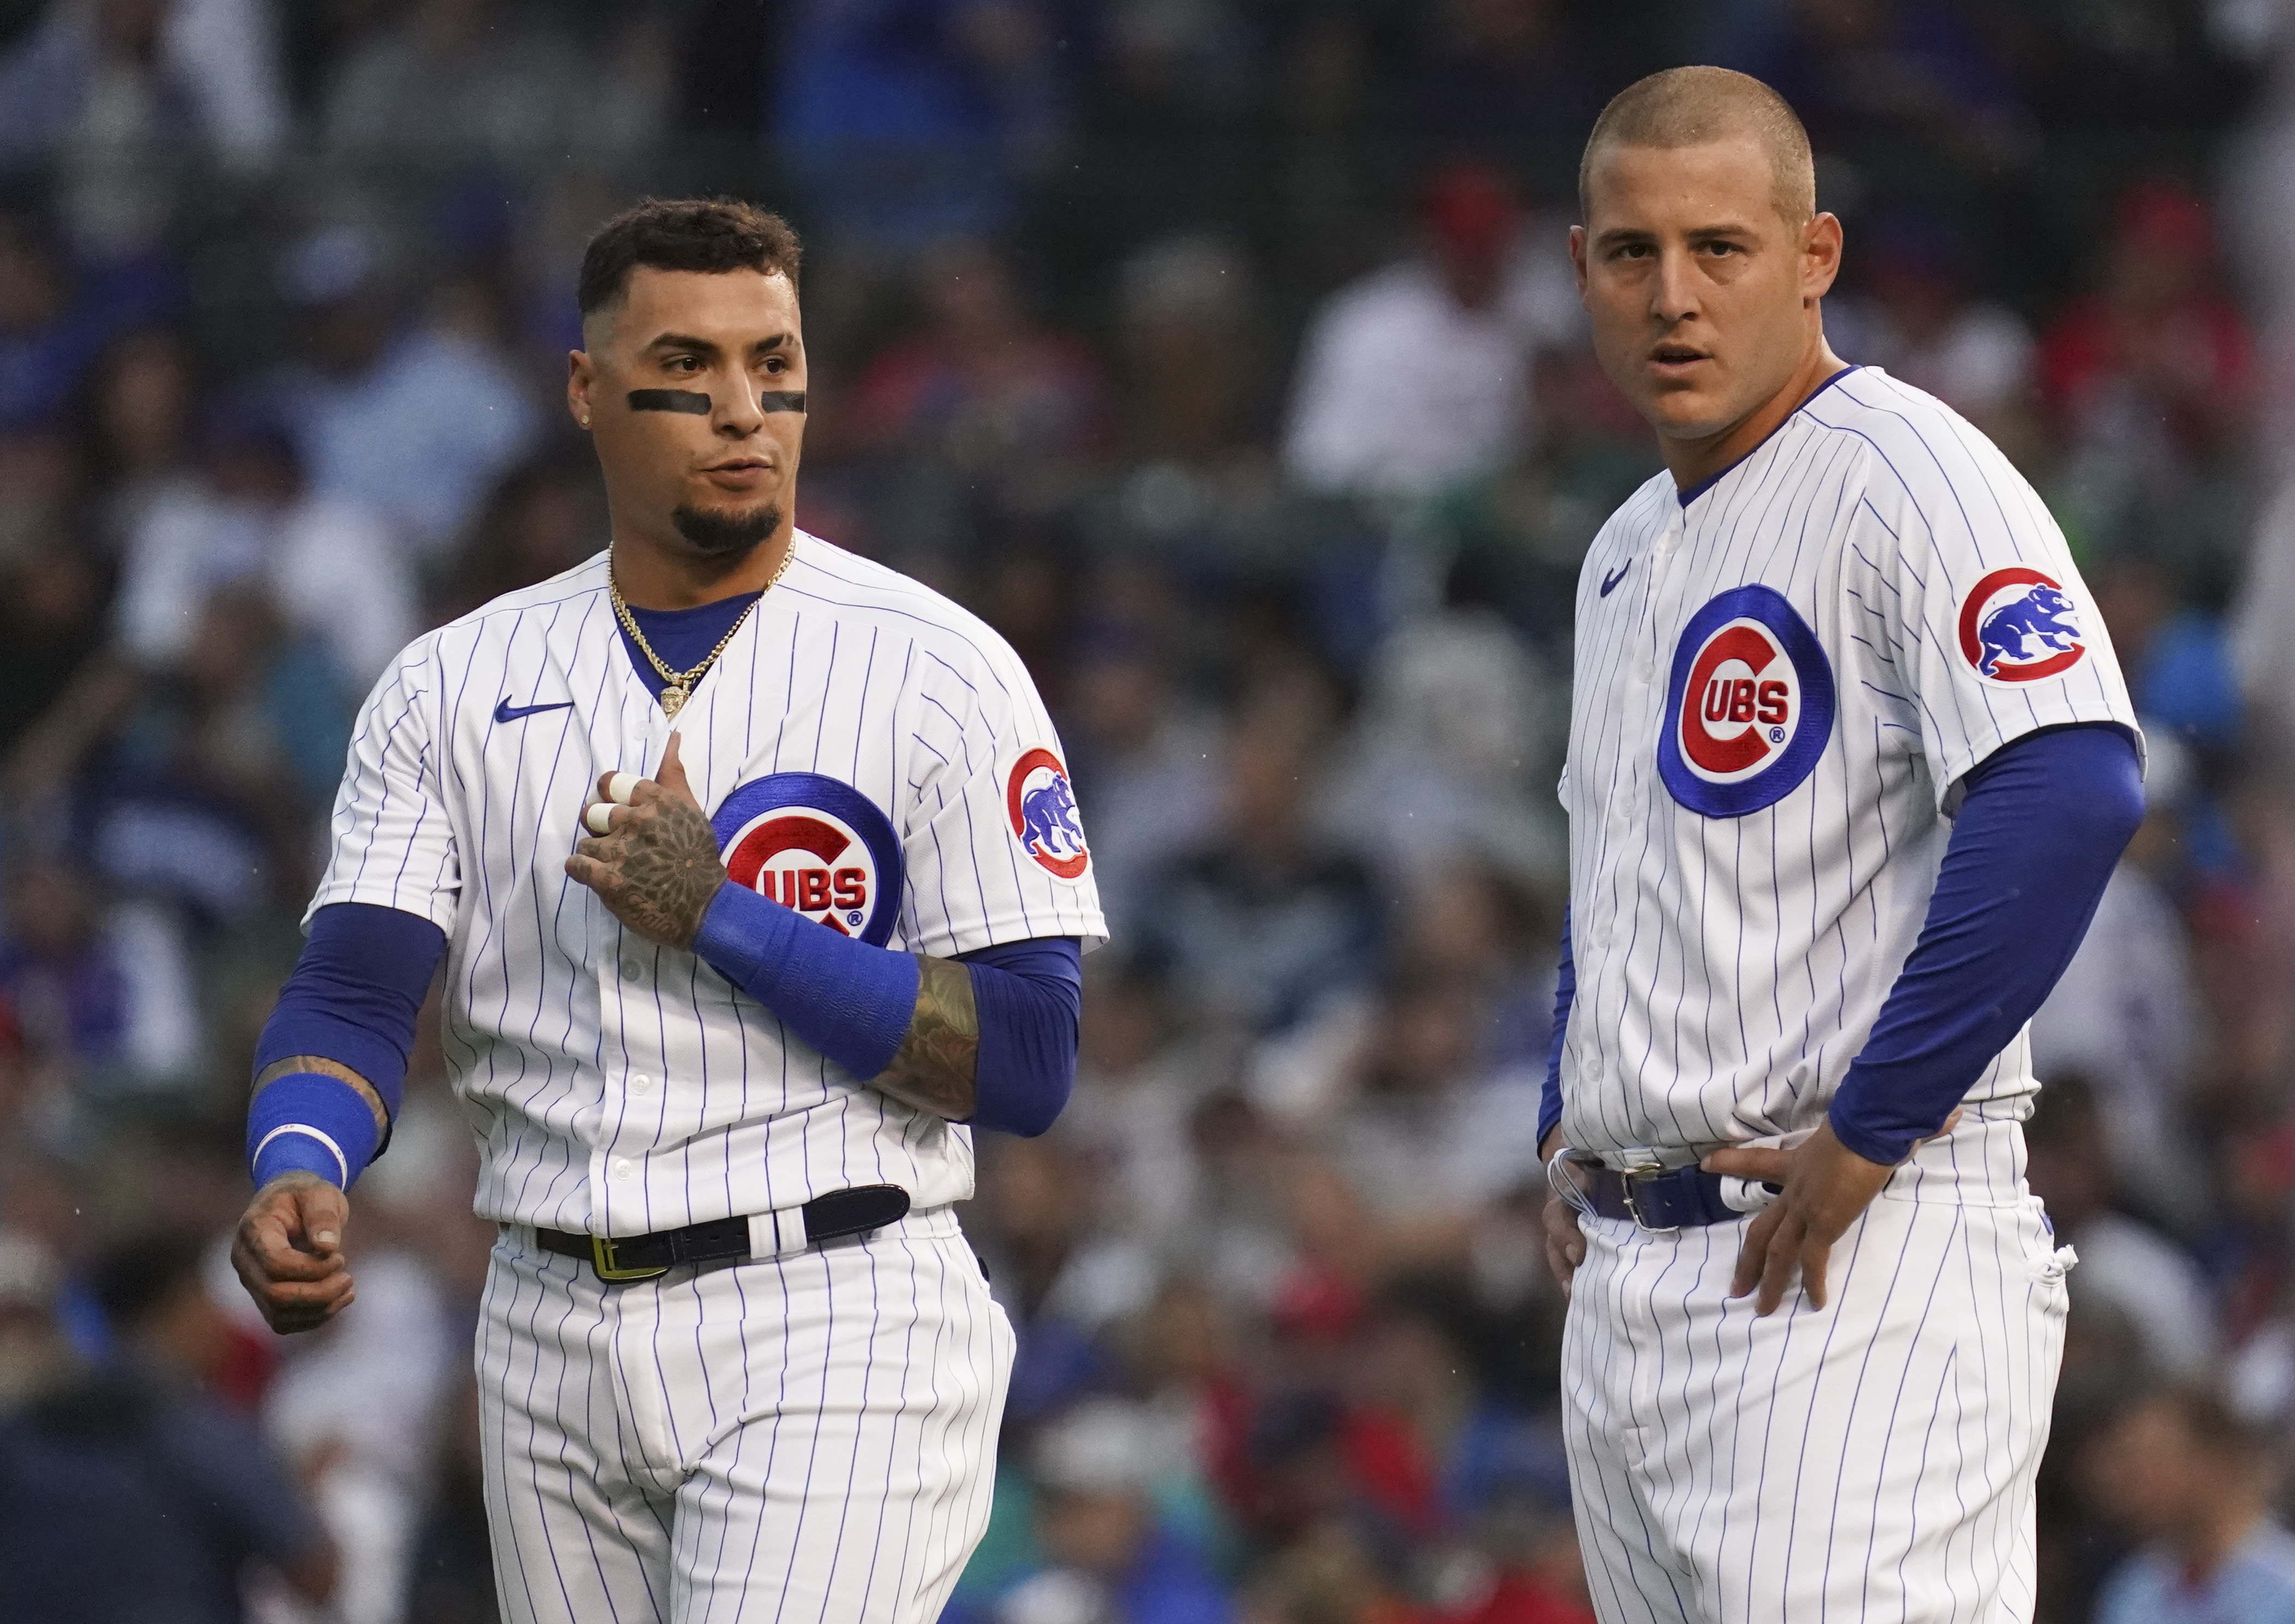 June 7 update: Former Cubs Javier Báez, Kris Bryant, Anthony Rizzo